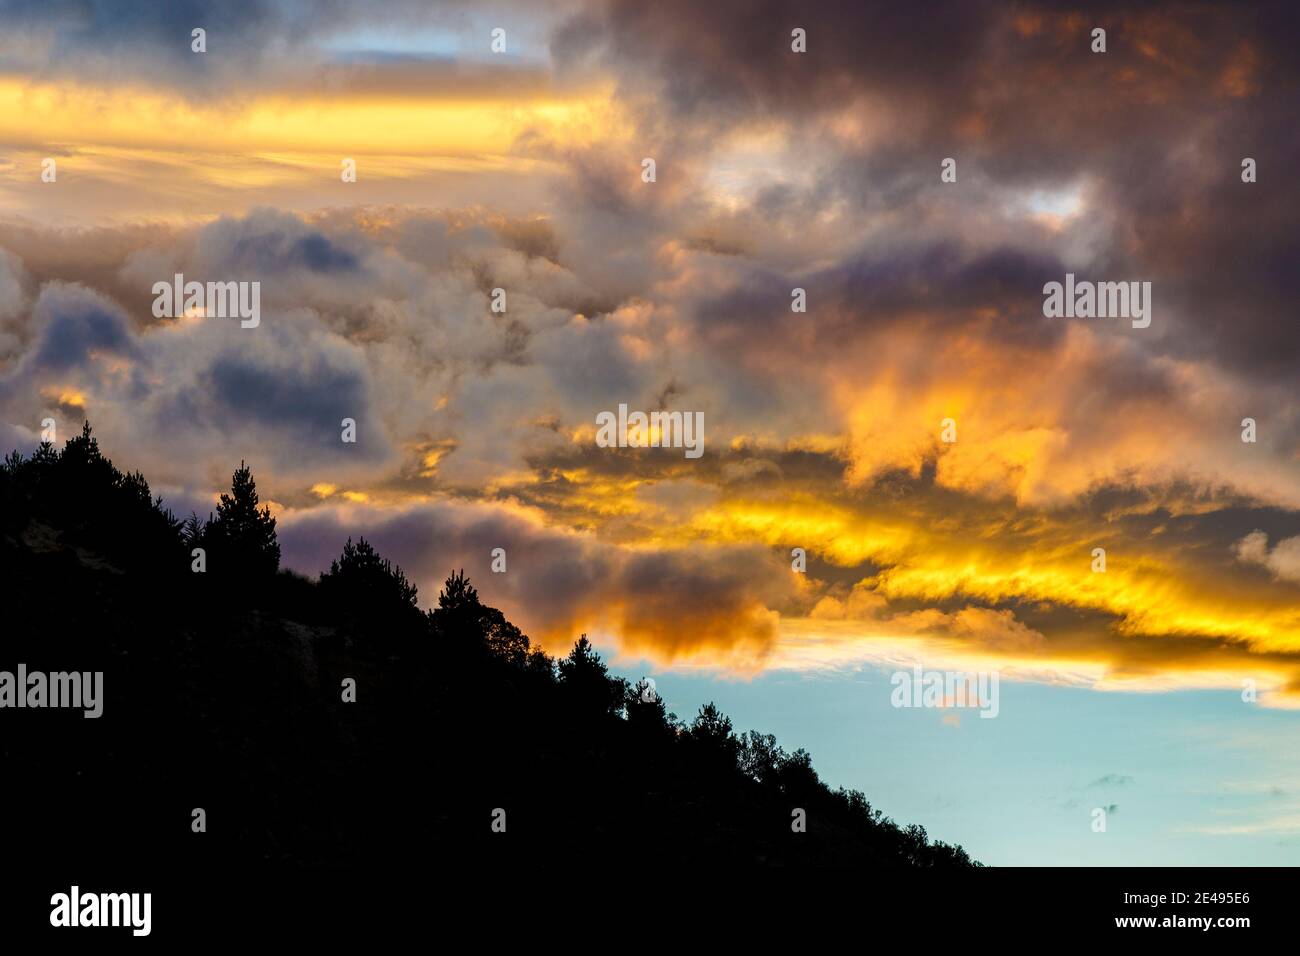 Fiery sunset and clouds over hillside at Oamaru, South Island, New Zealand. Stock Photo